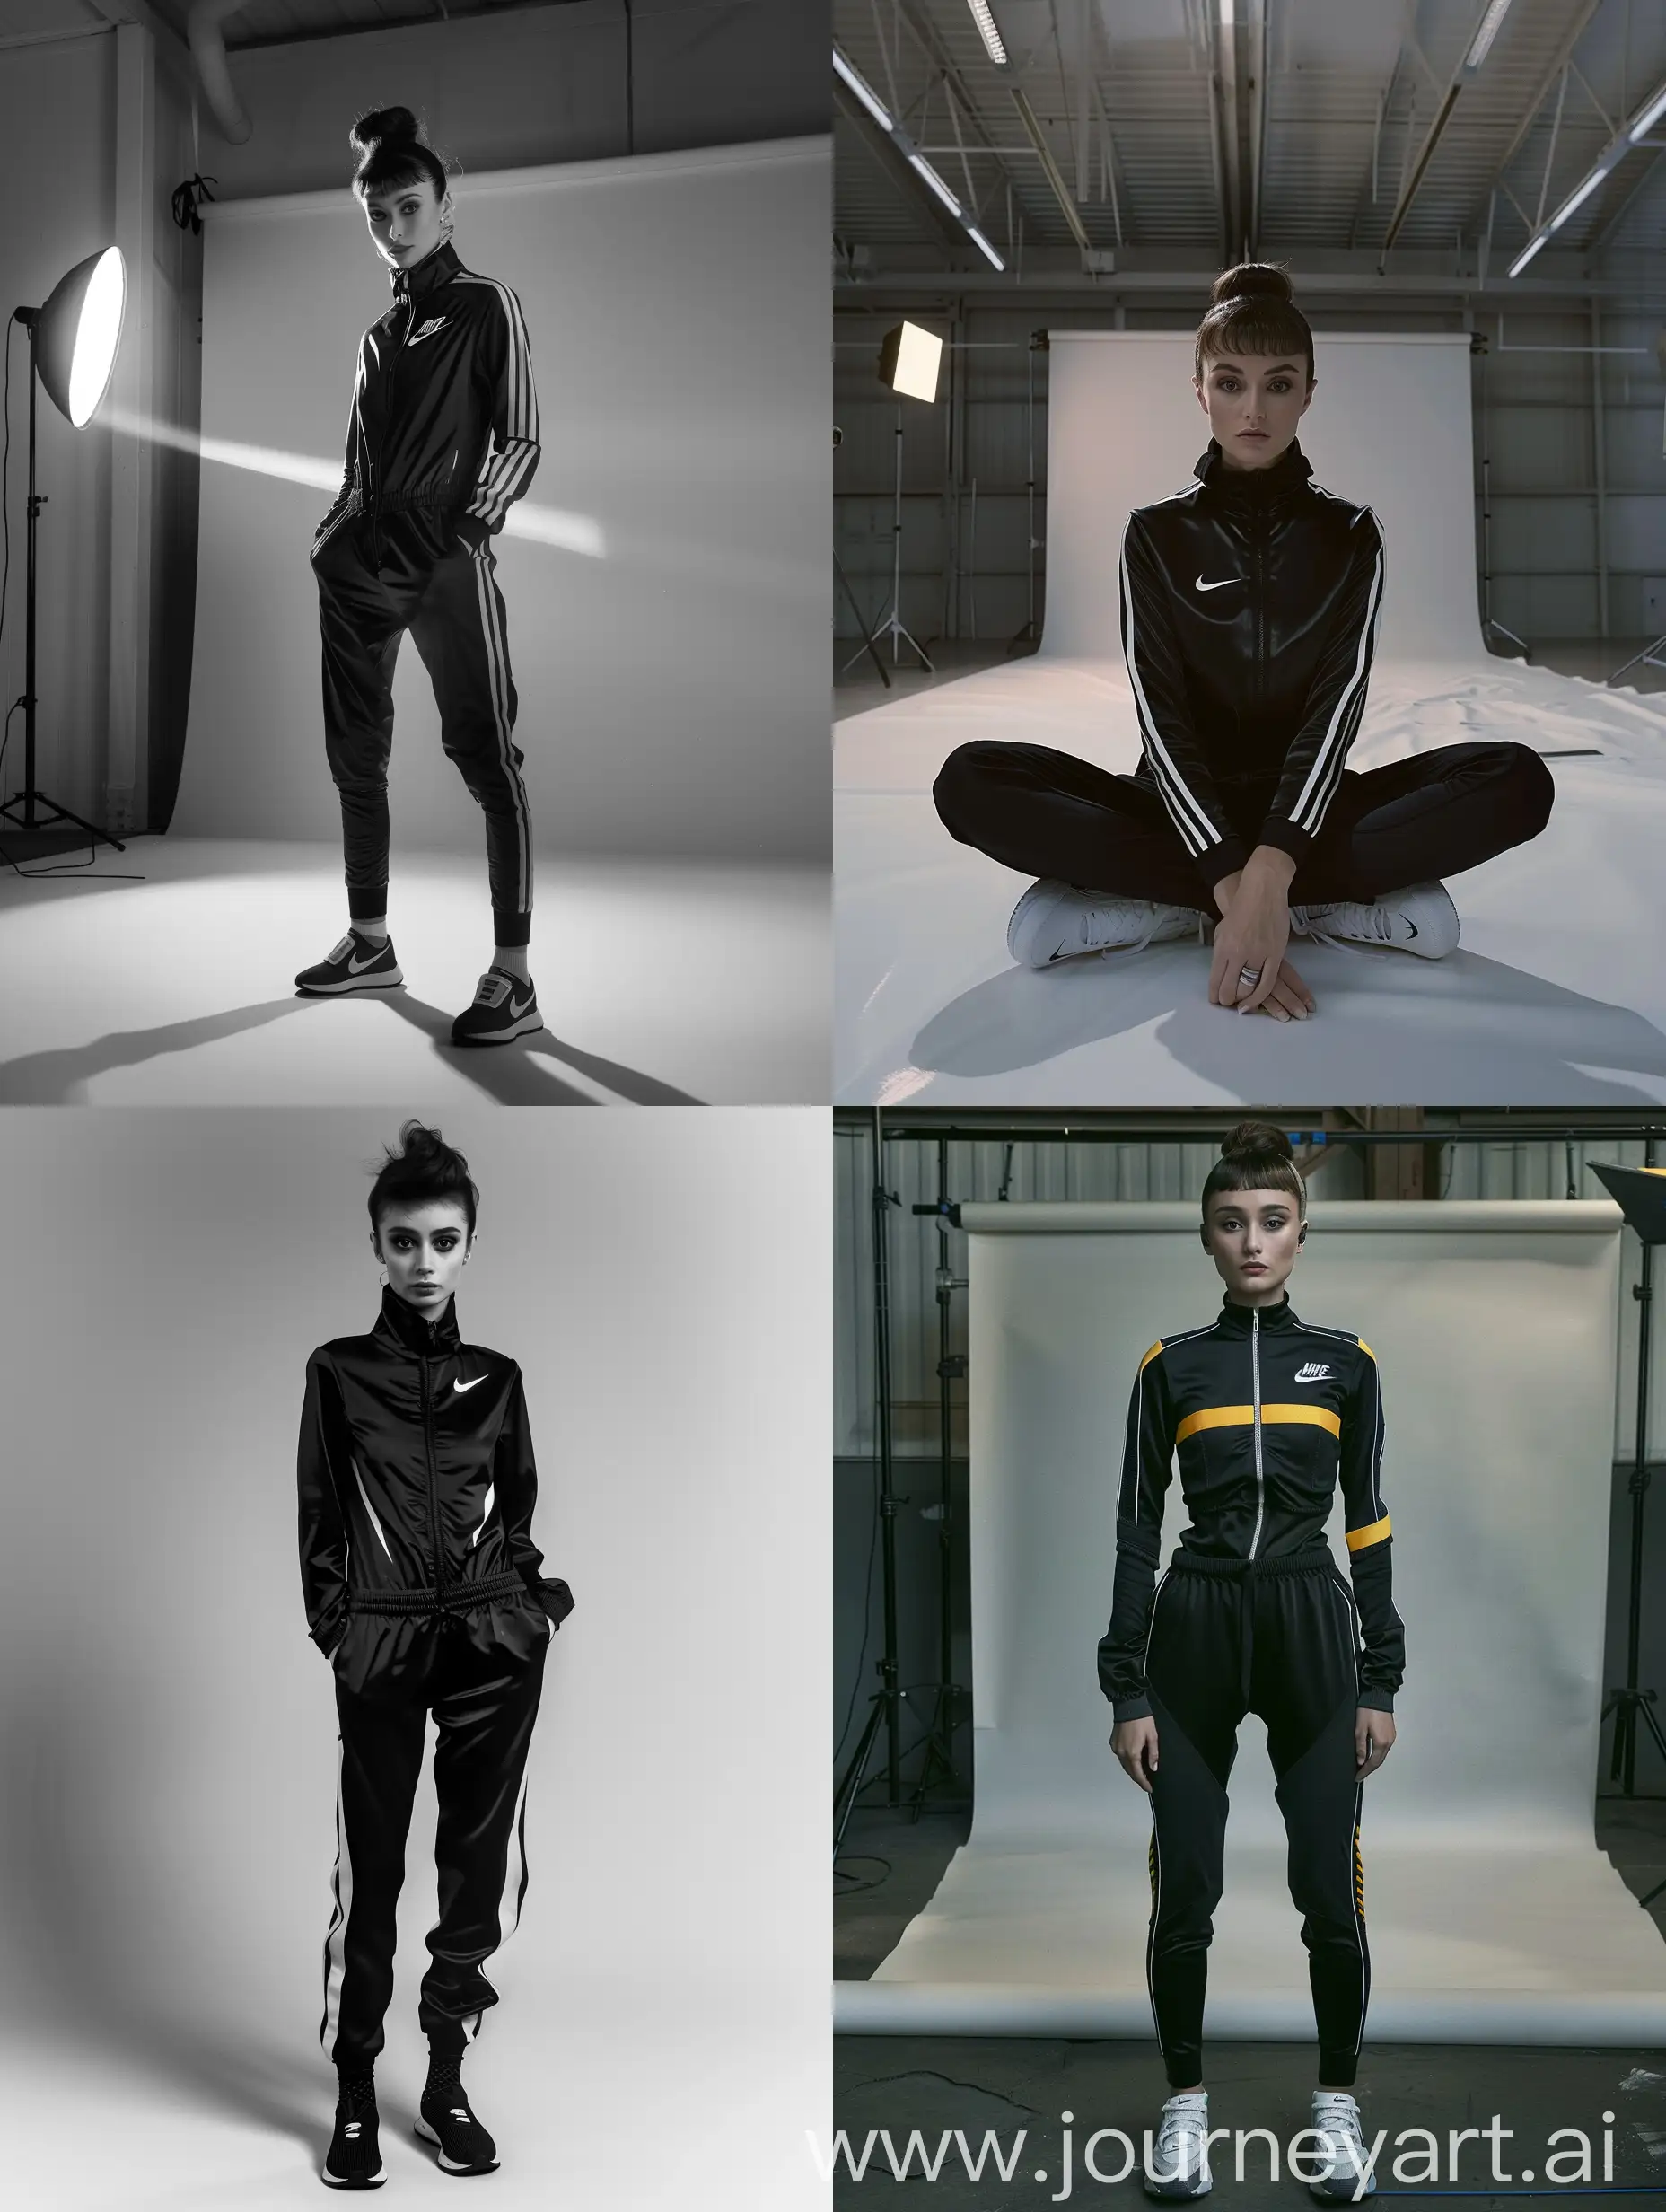 - Audrey Hepburn x Nike 
- Environment: Empty studio
- Background: Studio backdrop
- Style: Futuristic Track Suit
- Photography Type: Concept, conceitual
- Theme: Audrey Hepburn x Nike 2040
- Visual Filters: Fashion Film Look-Up Table (LUT)
- Camera Effects: Camera Blur, Camera Haze
- Resolution: High
